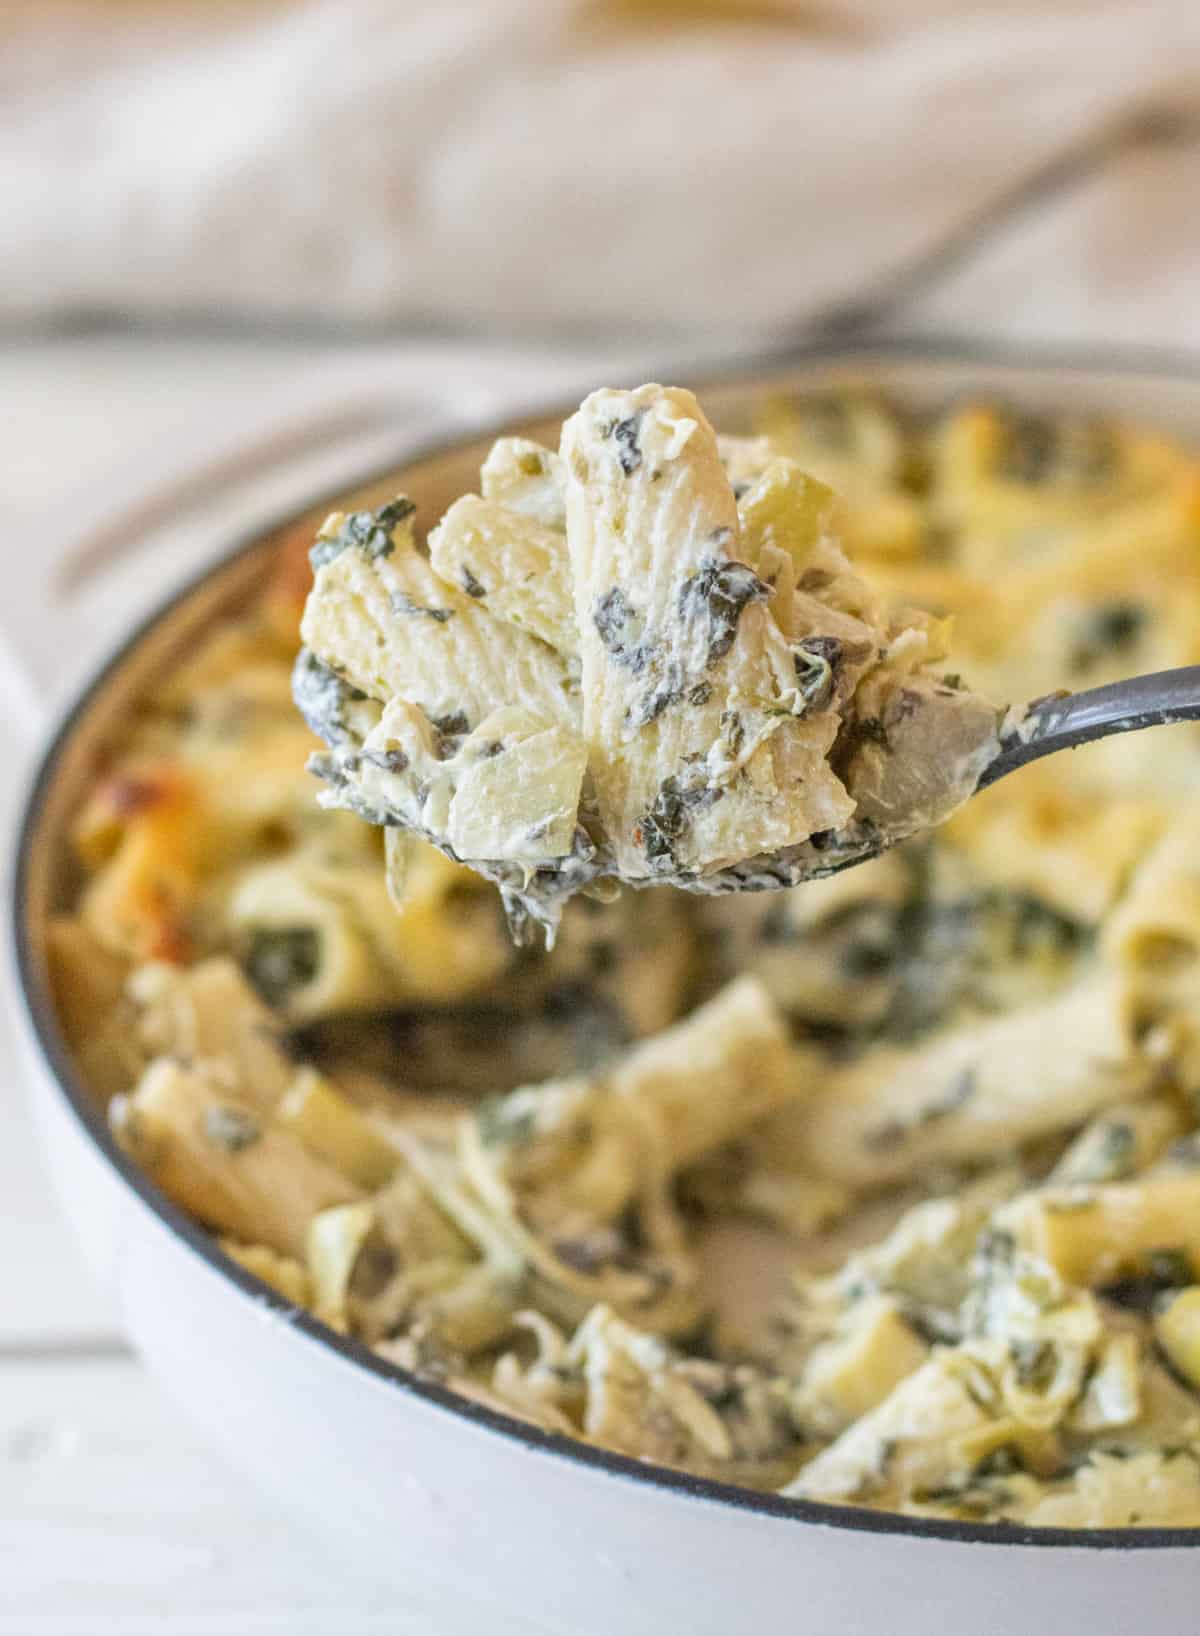 Forkful of rigatoni noodles in a spinach artichoke sauce.